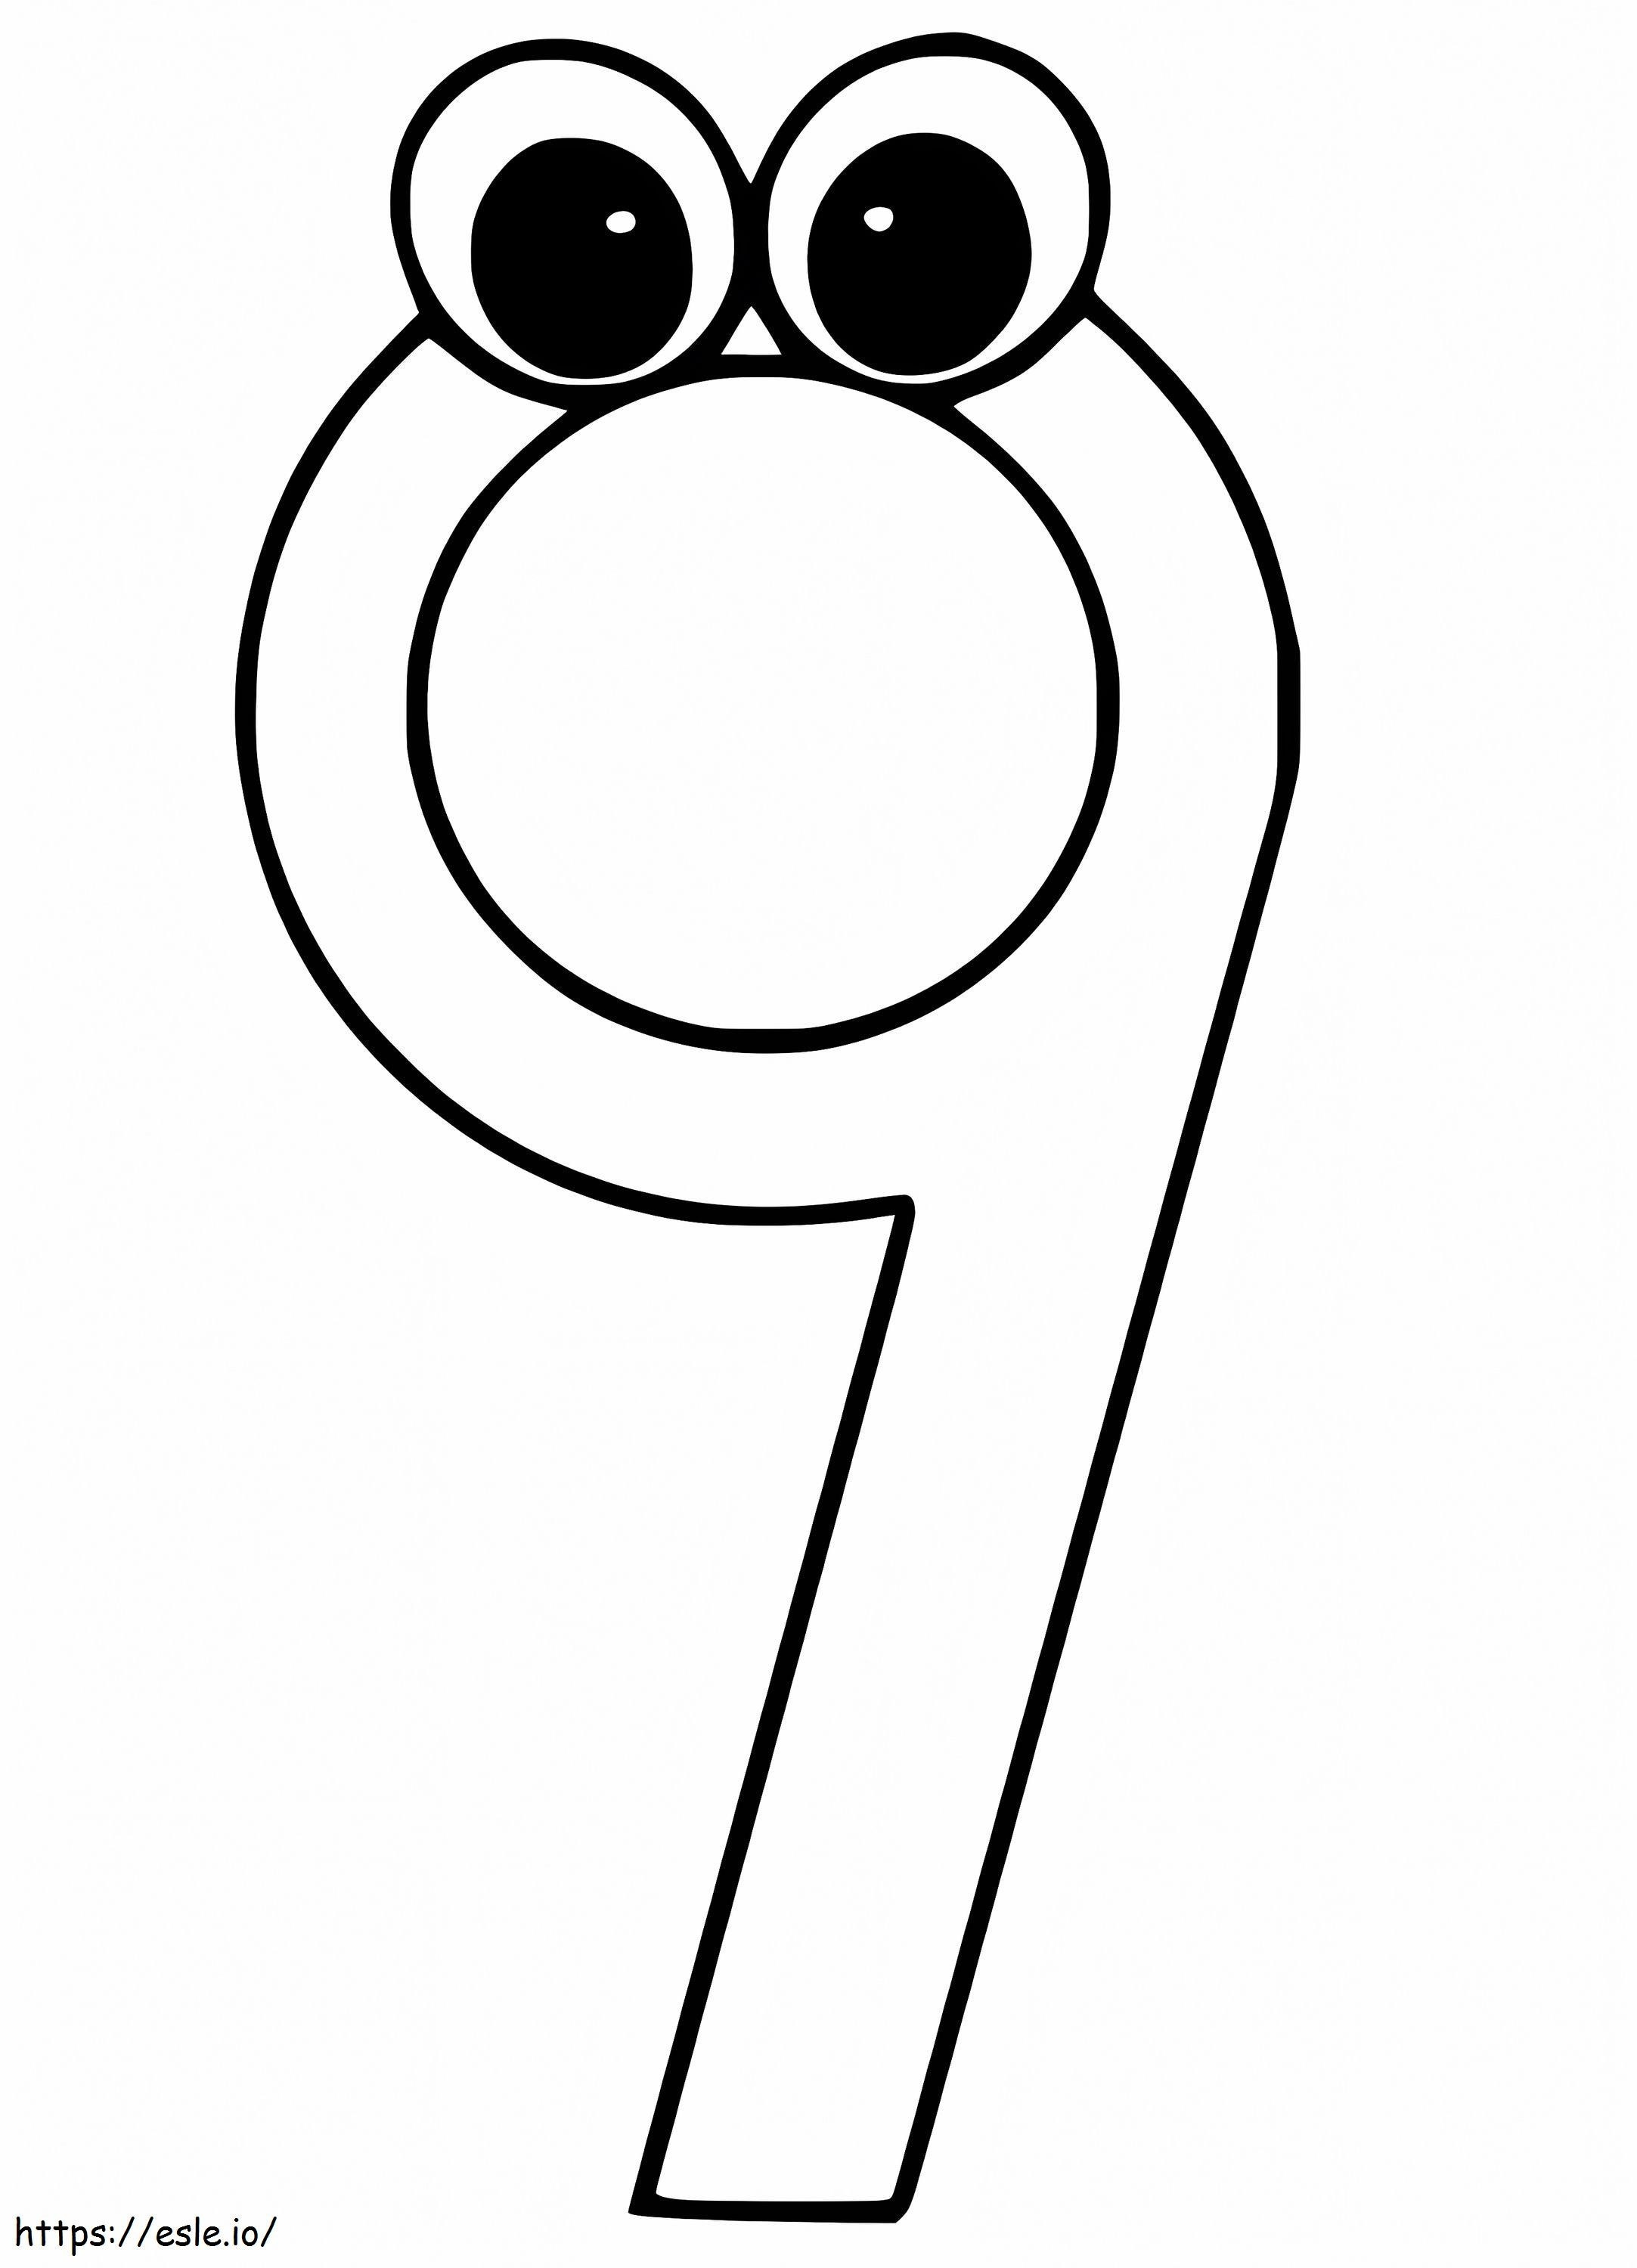 Number 9 With Eyes coloring page